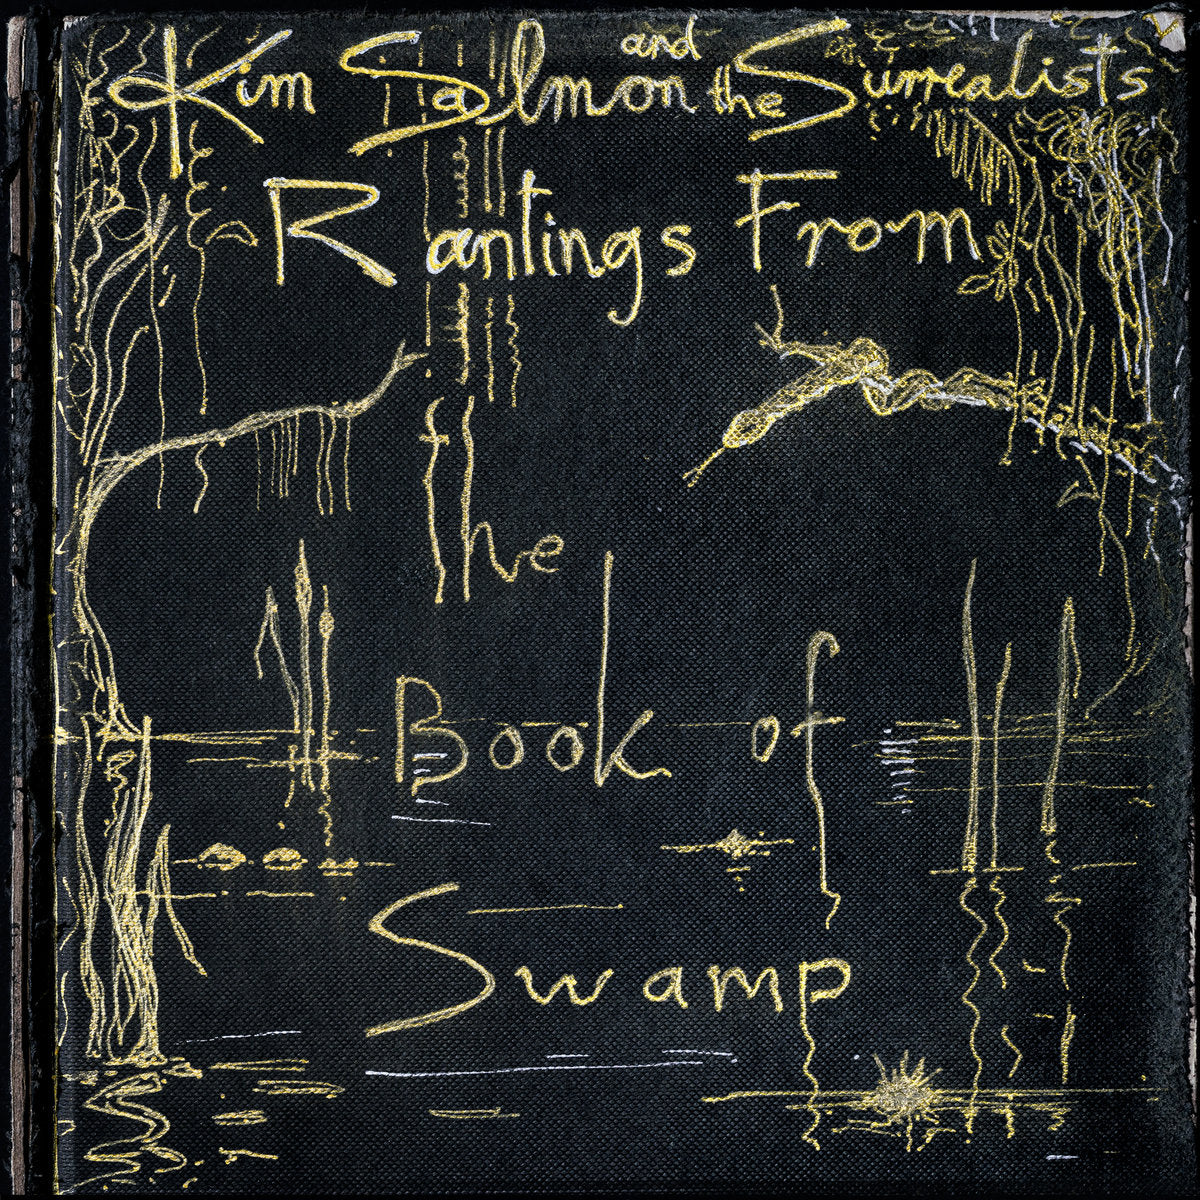 Arcade Sound - Kim Salmon & The Surrealists - Rantings From the Book of Swamp - 2xLP front cover